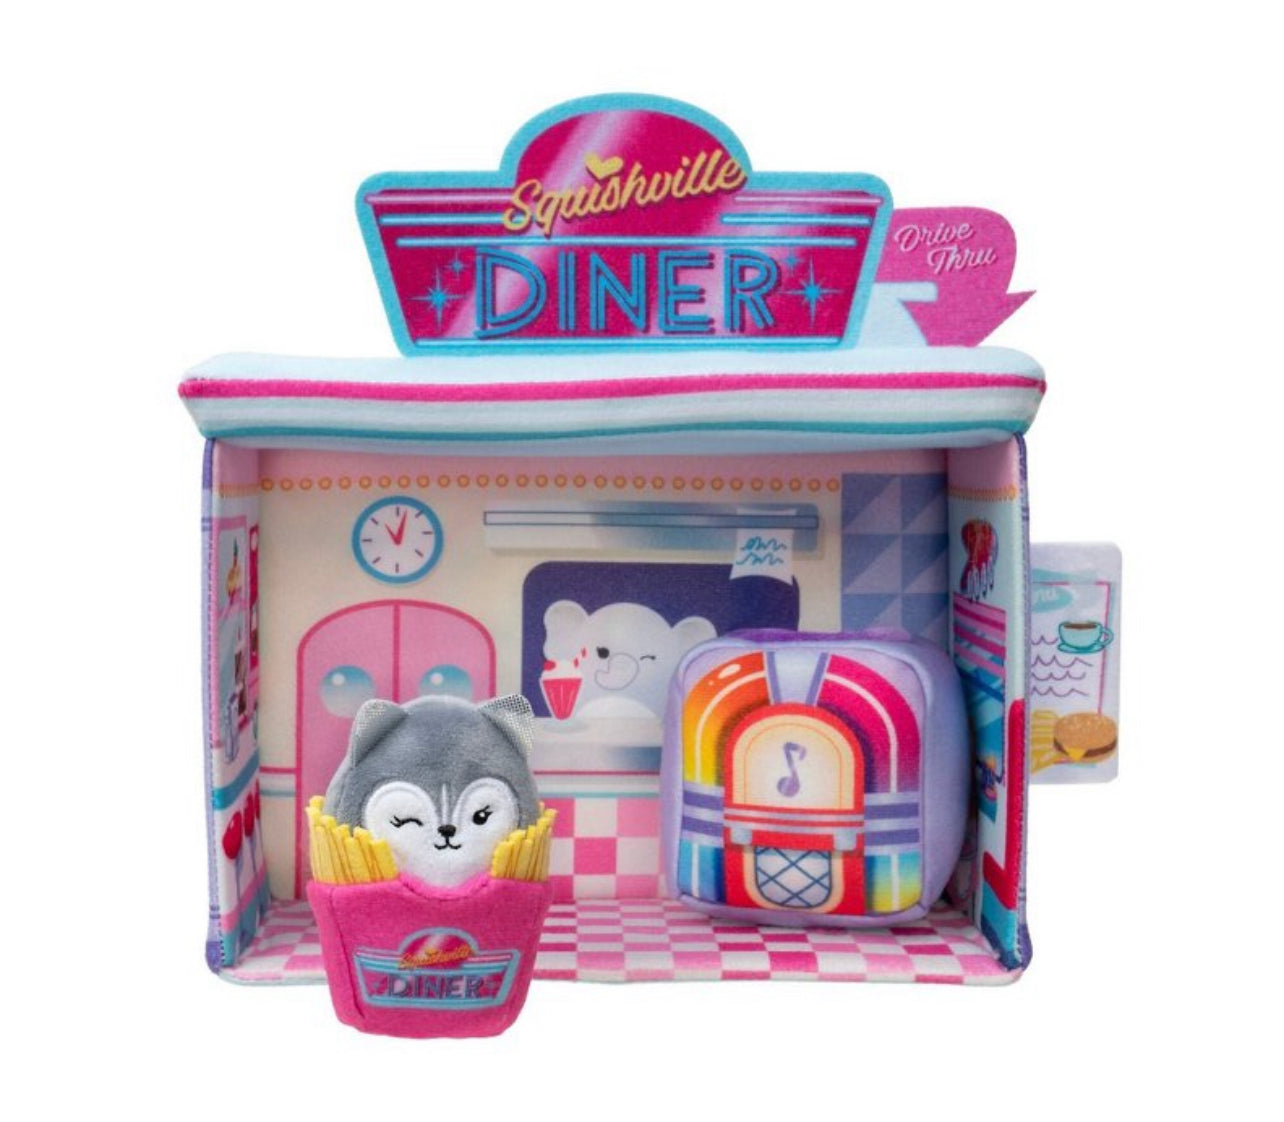 Squishville Darling Diner Deluxe Play Scene 2" Plush (Box Has Some Damage)